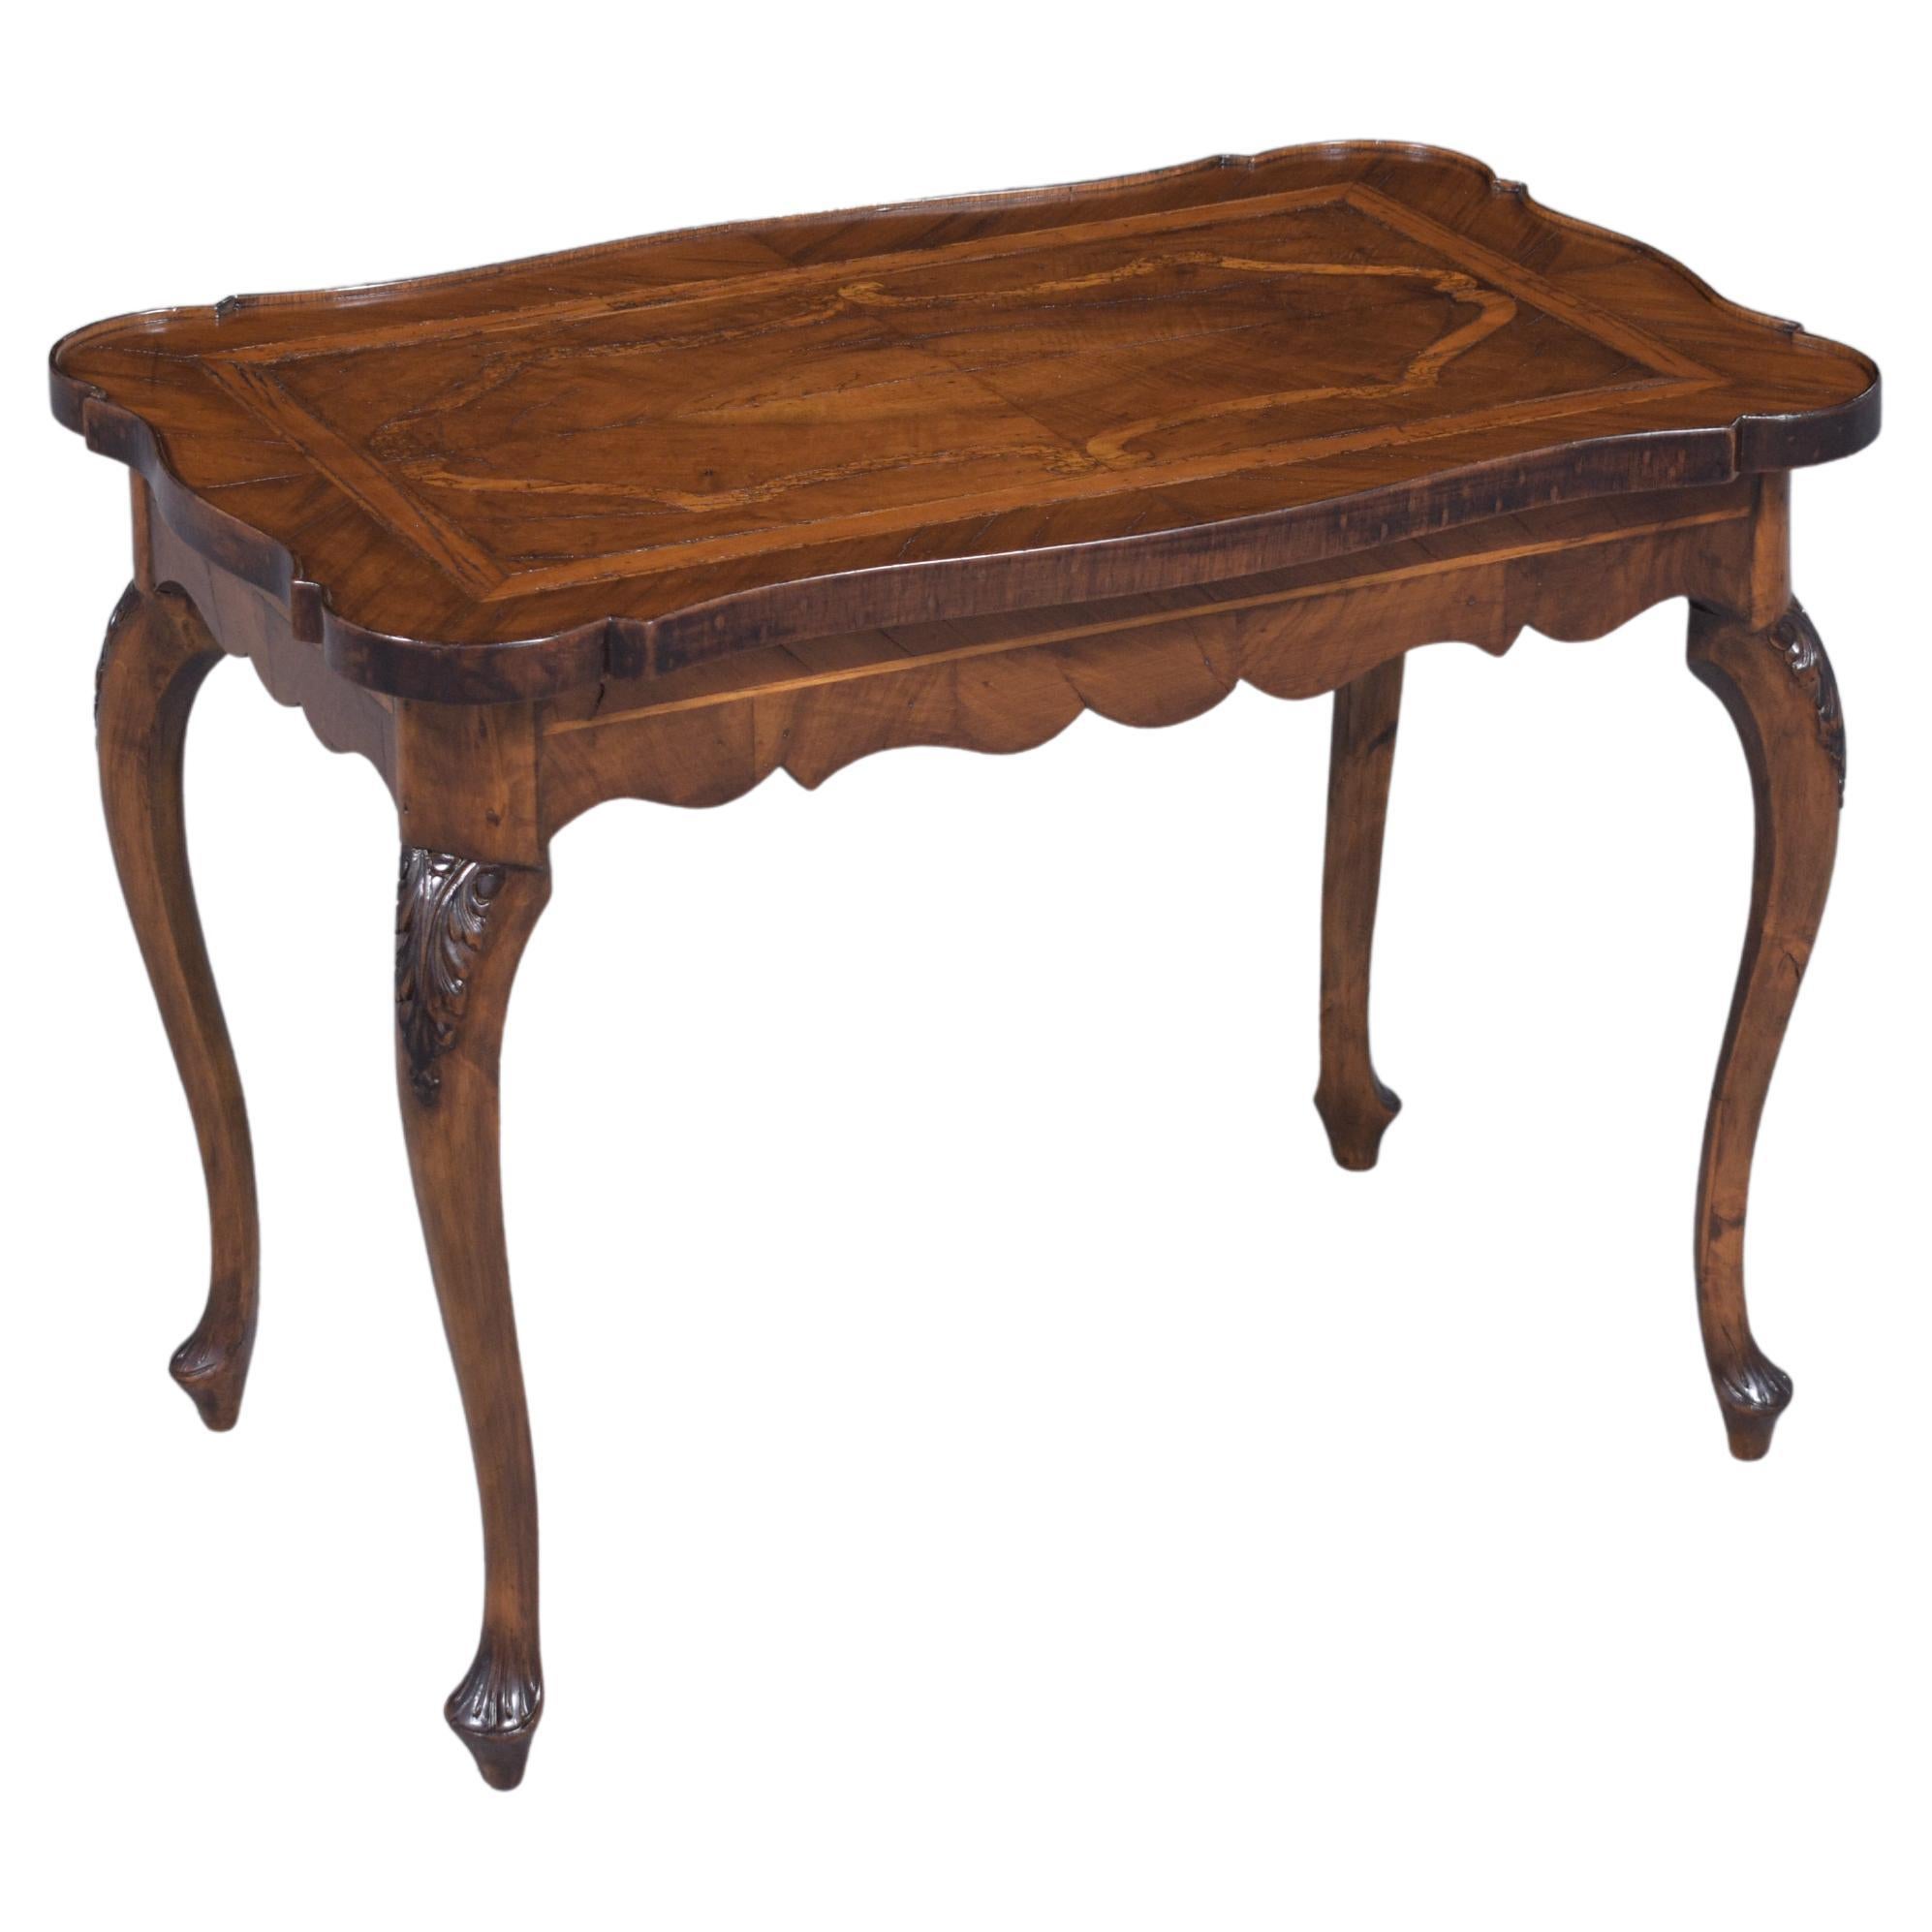 Late 19th-Century English Walnut Side Table with Inlaid Pattern For Sale